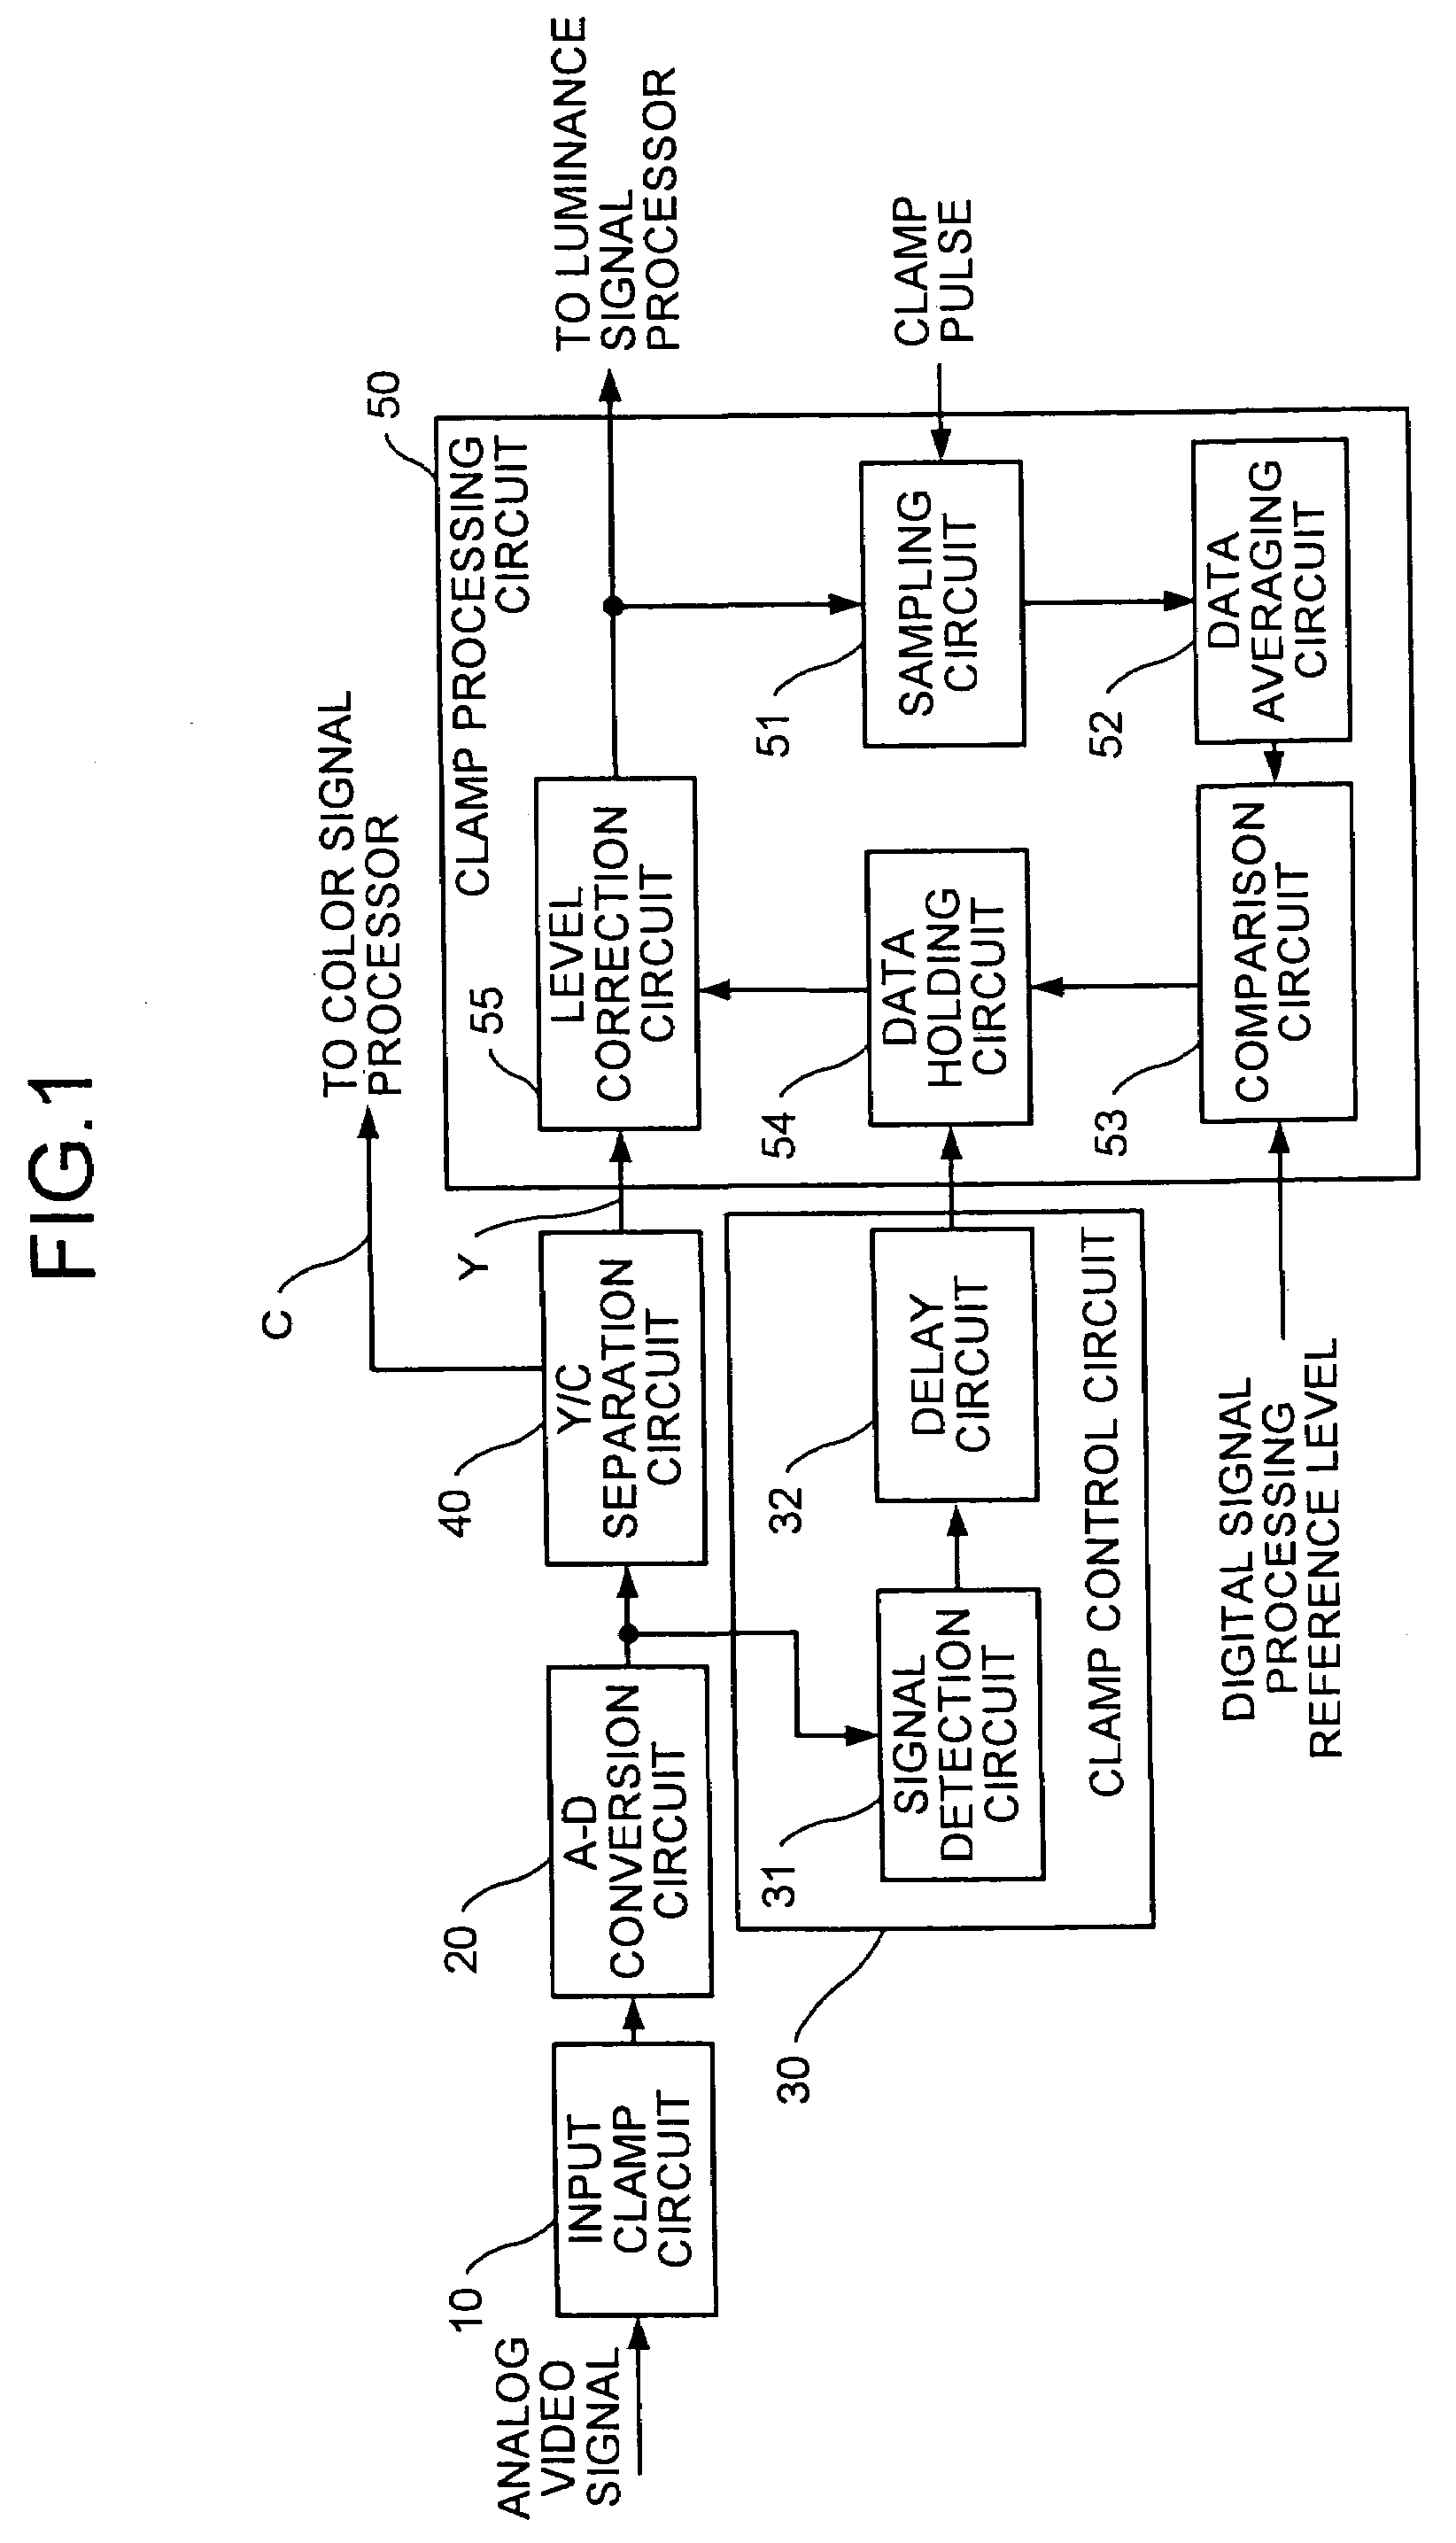 Clamp circuit for clamping a digital video signal